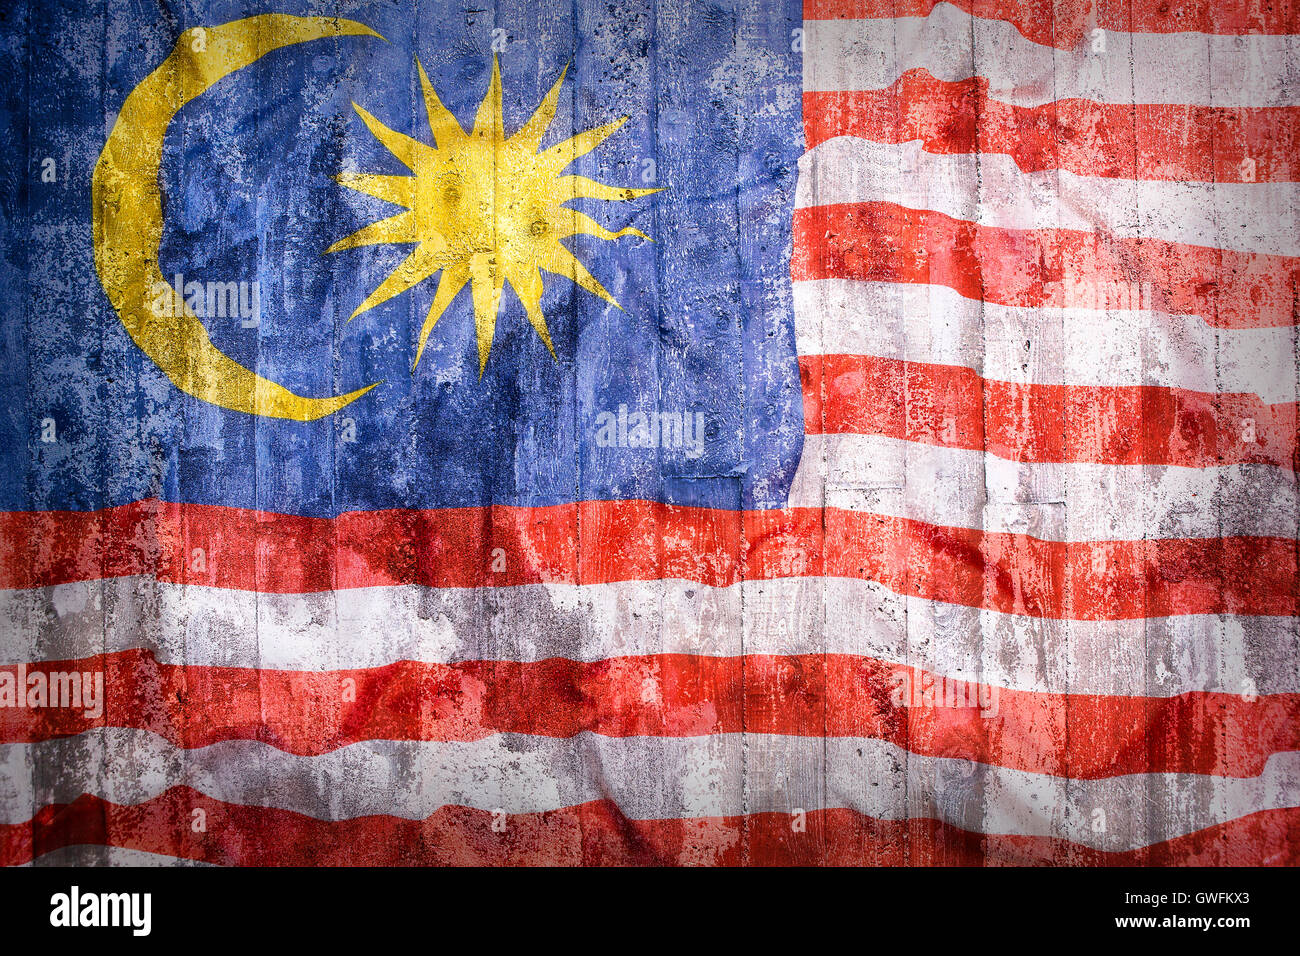 Grunge style of Malaysia flag on a brick wall for background Stock Photo